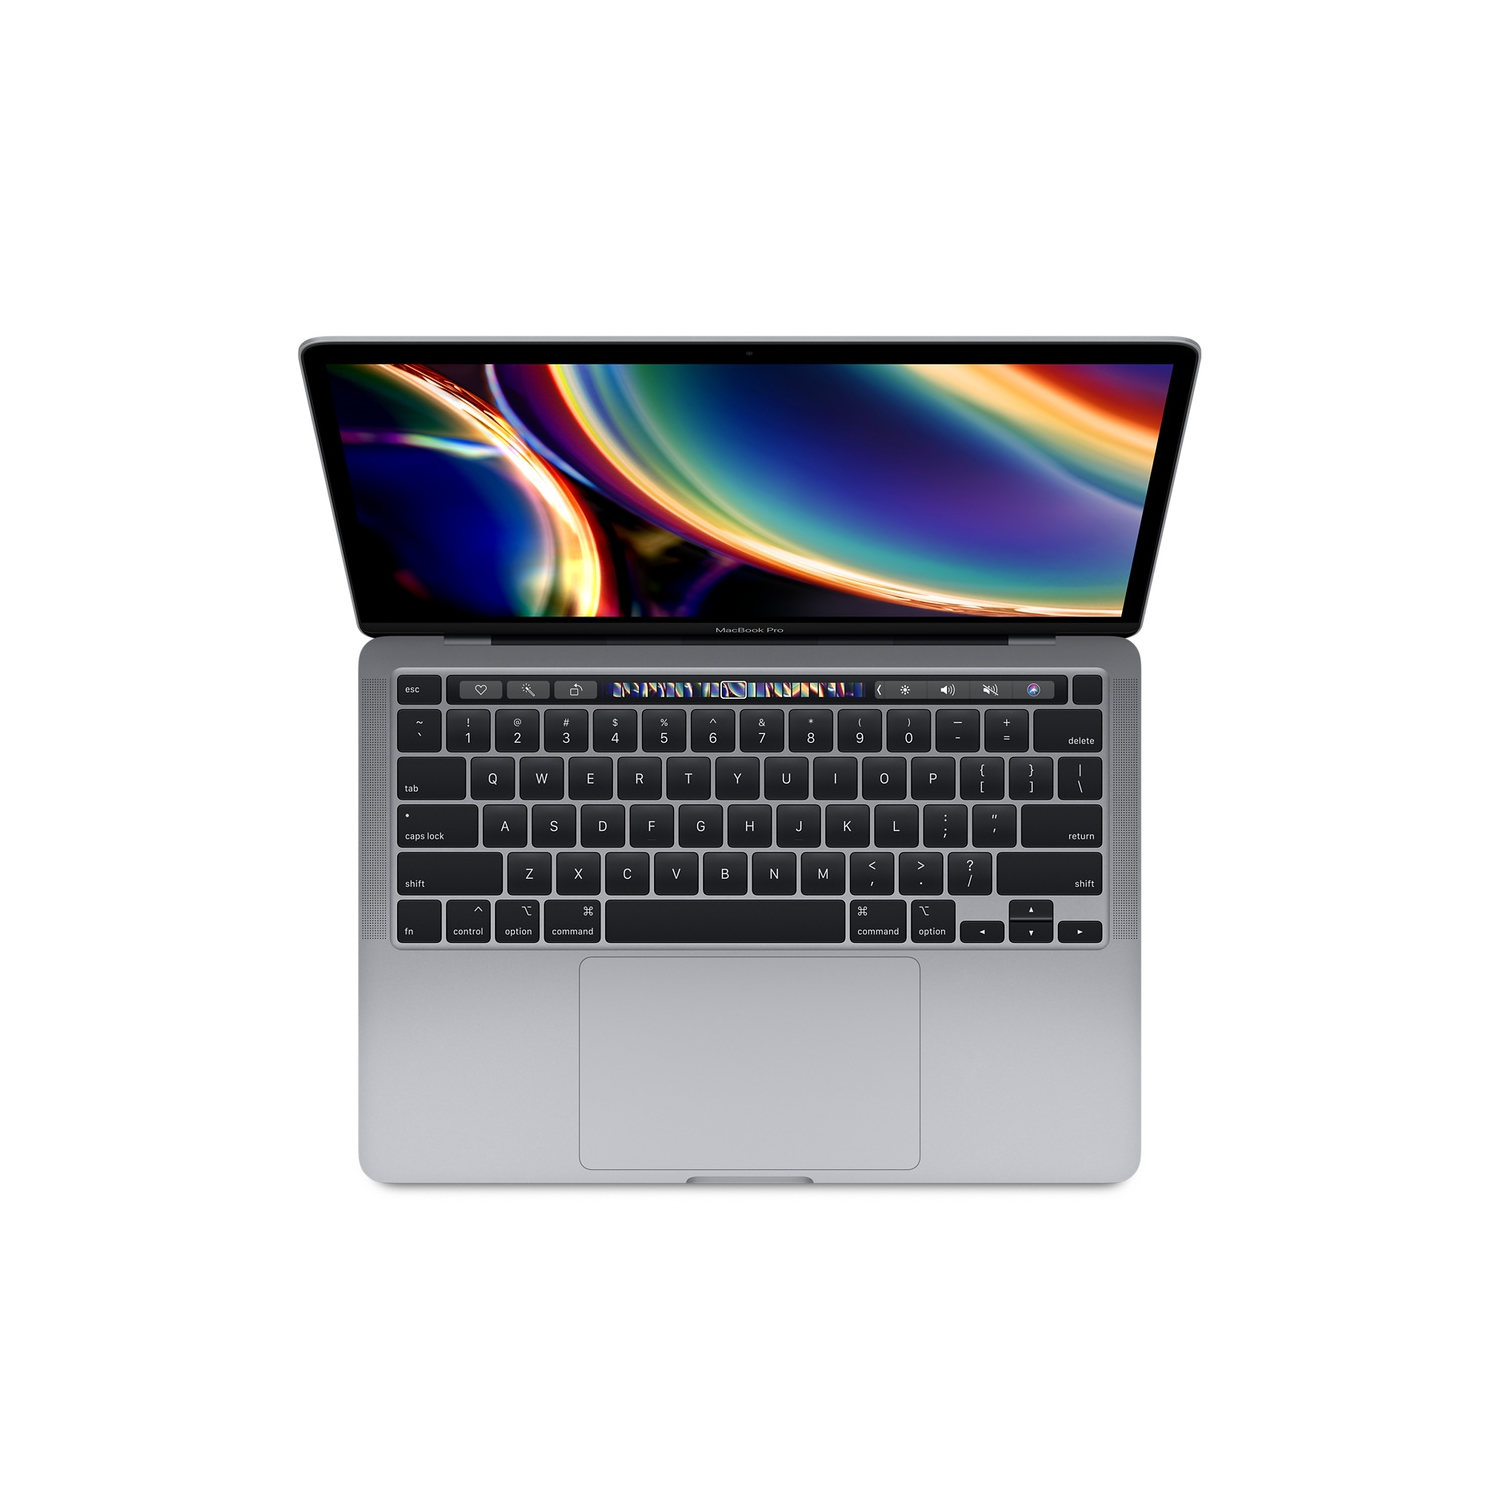 Refurbished - Good) Macbook Pro 13.3-inch (Space Gray, TB) 2.0Ghz 